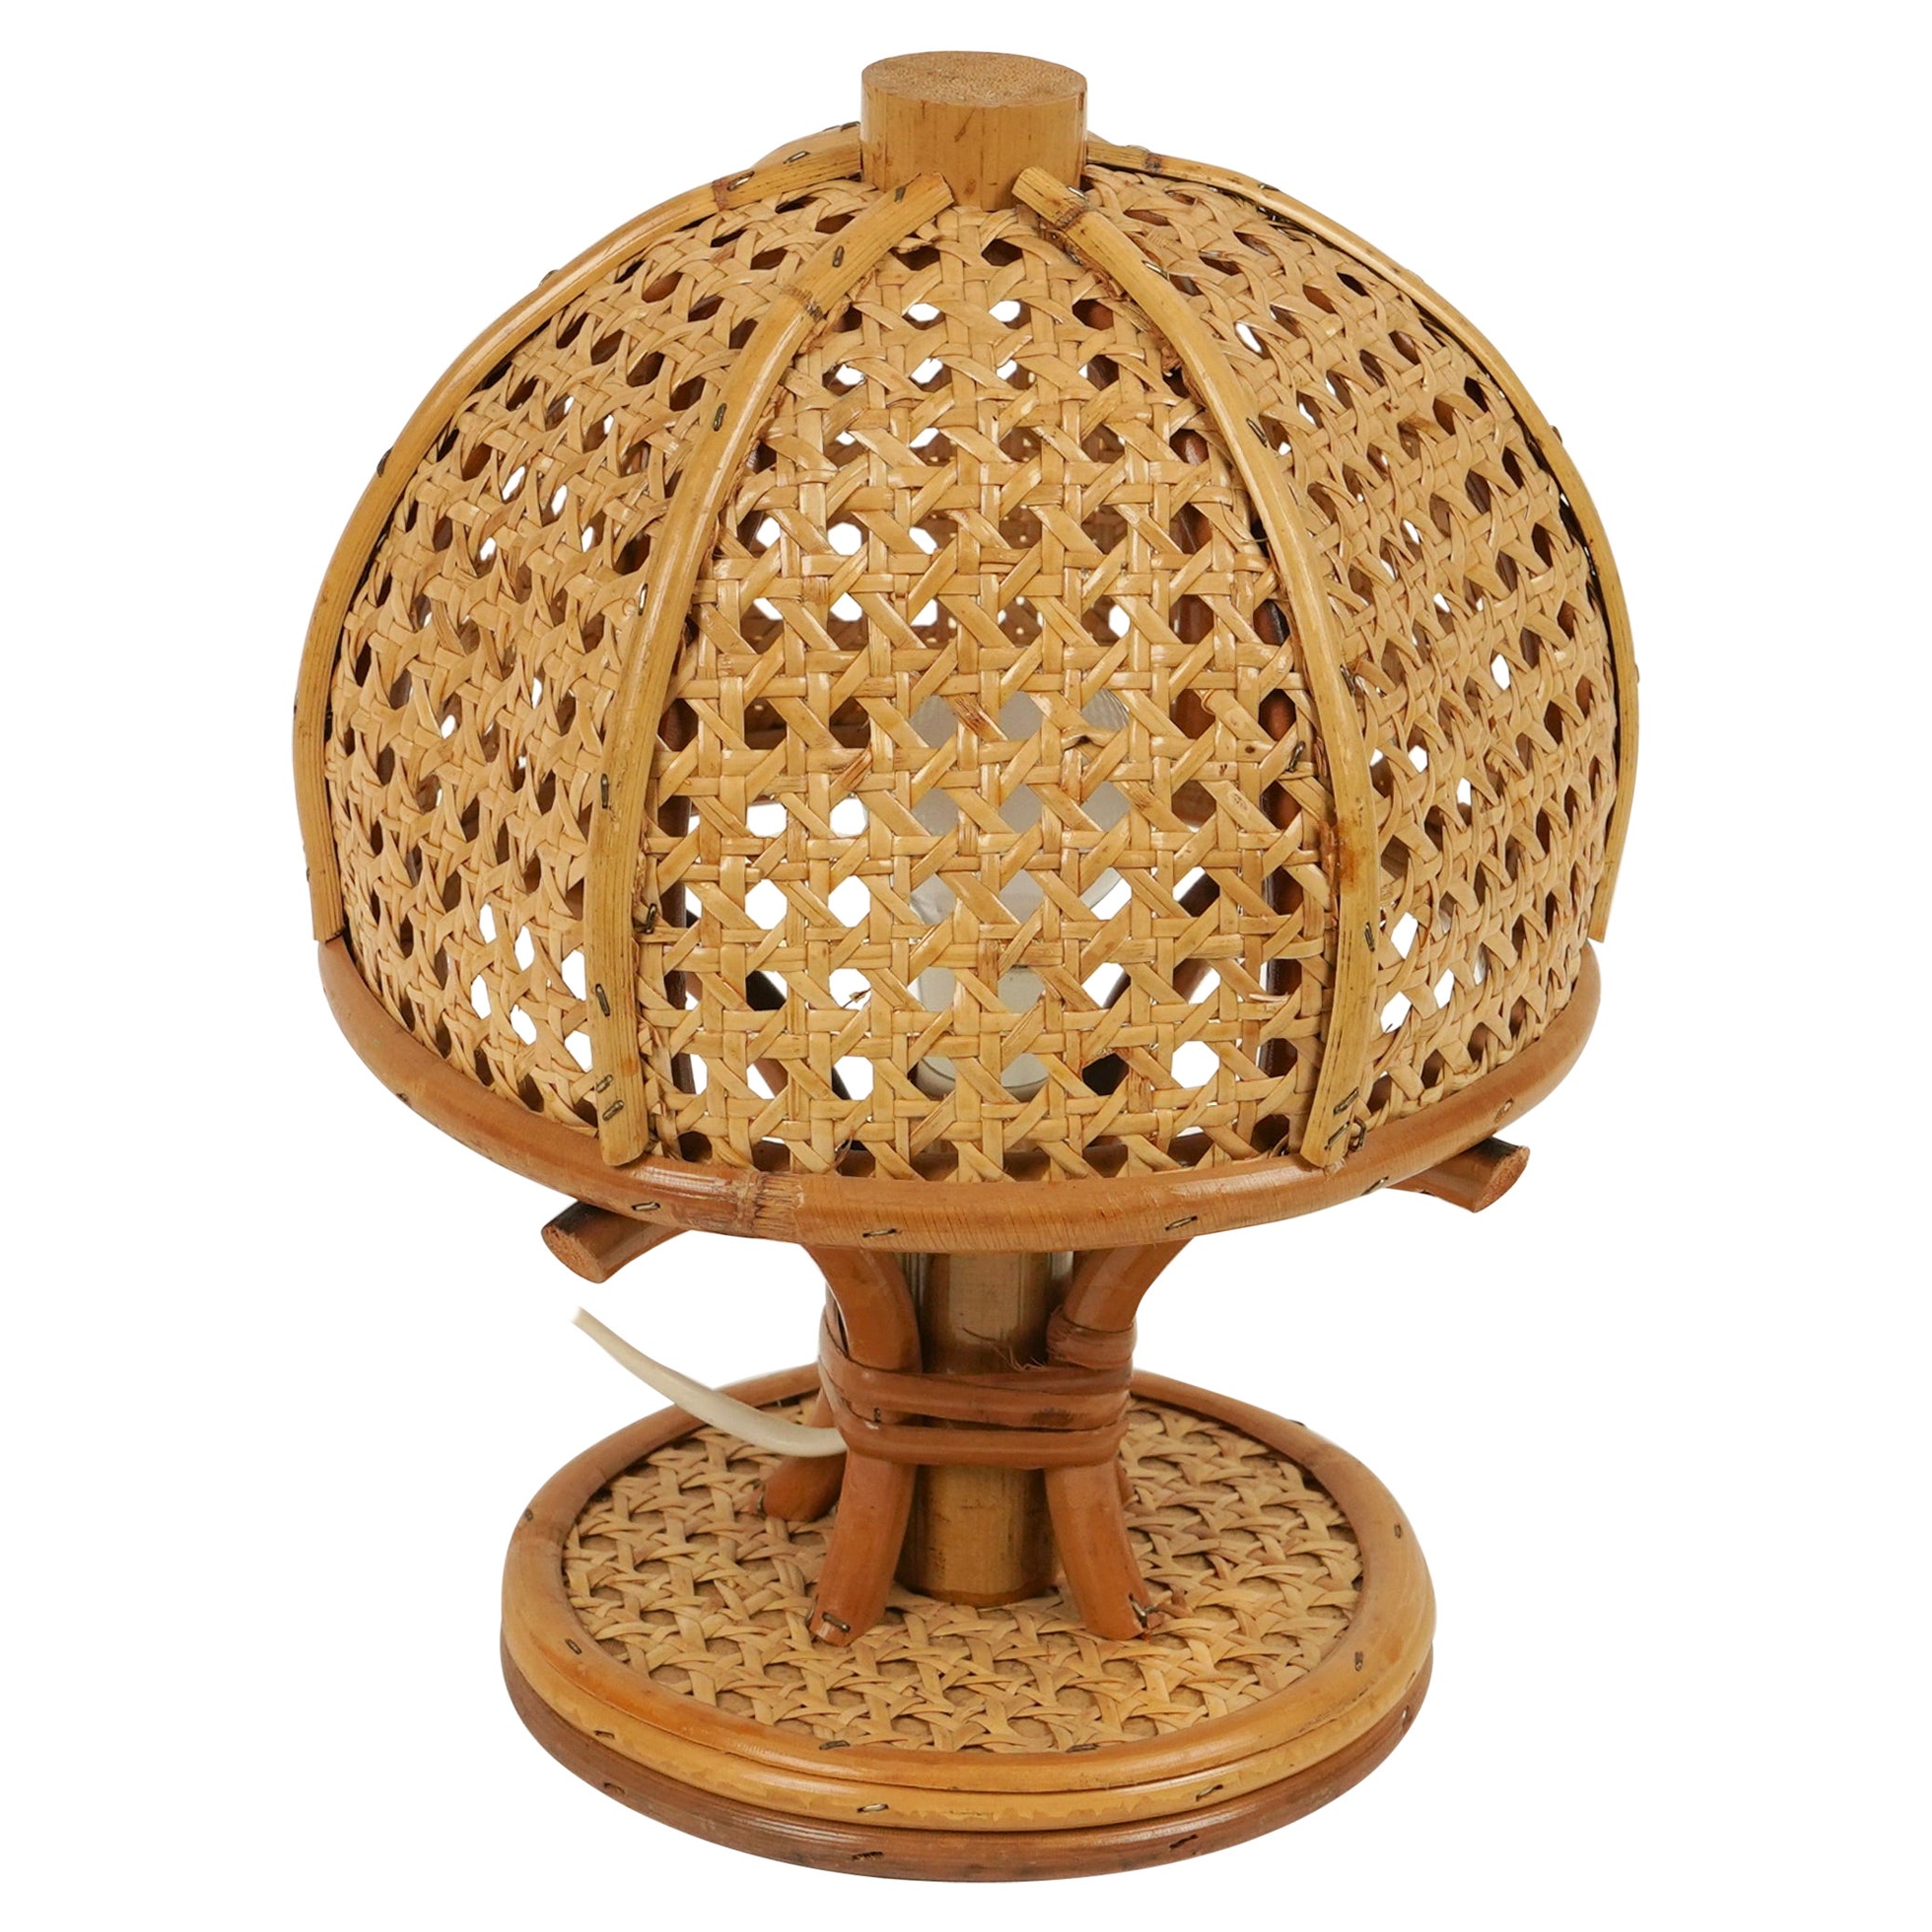 Midcentury Bamboo and Rattan Table Lamp Louis Sognot Style, Italy, 1970s For Sale